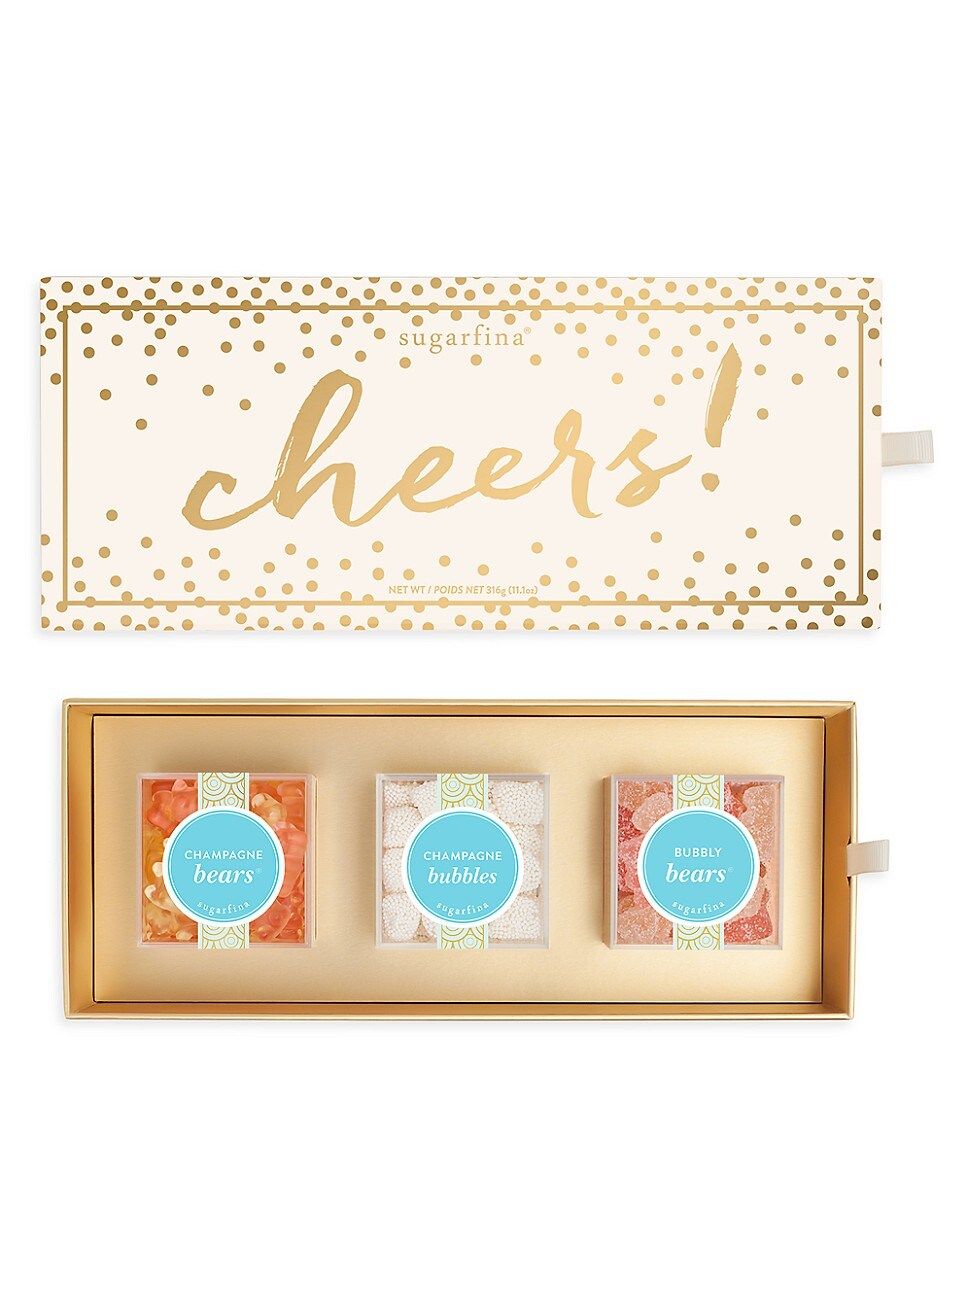 Cheers 3-Piece Candy Set - Blue | Saks Fifth Avenue